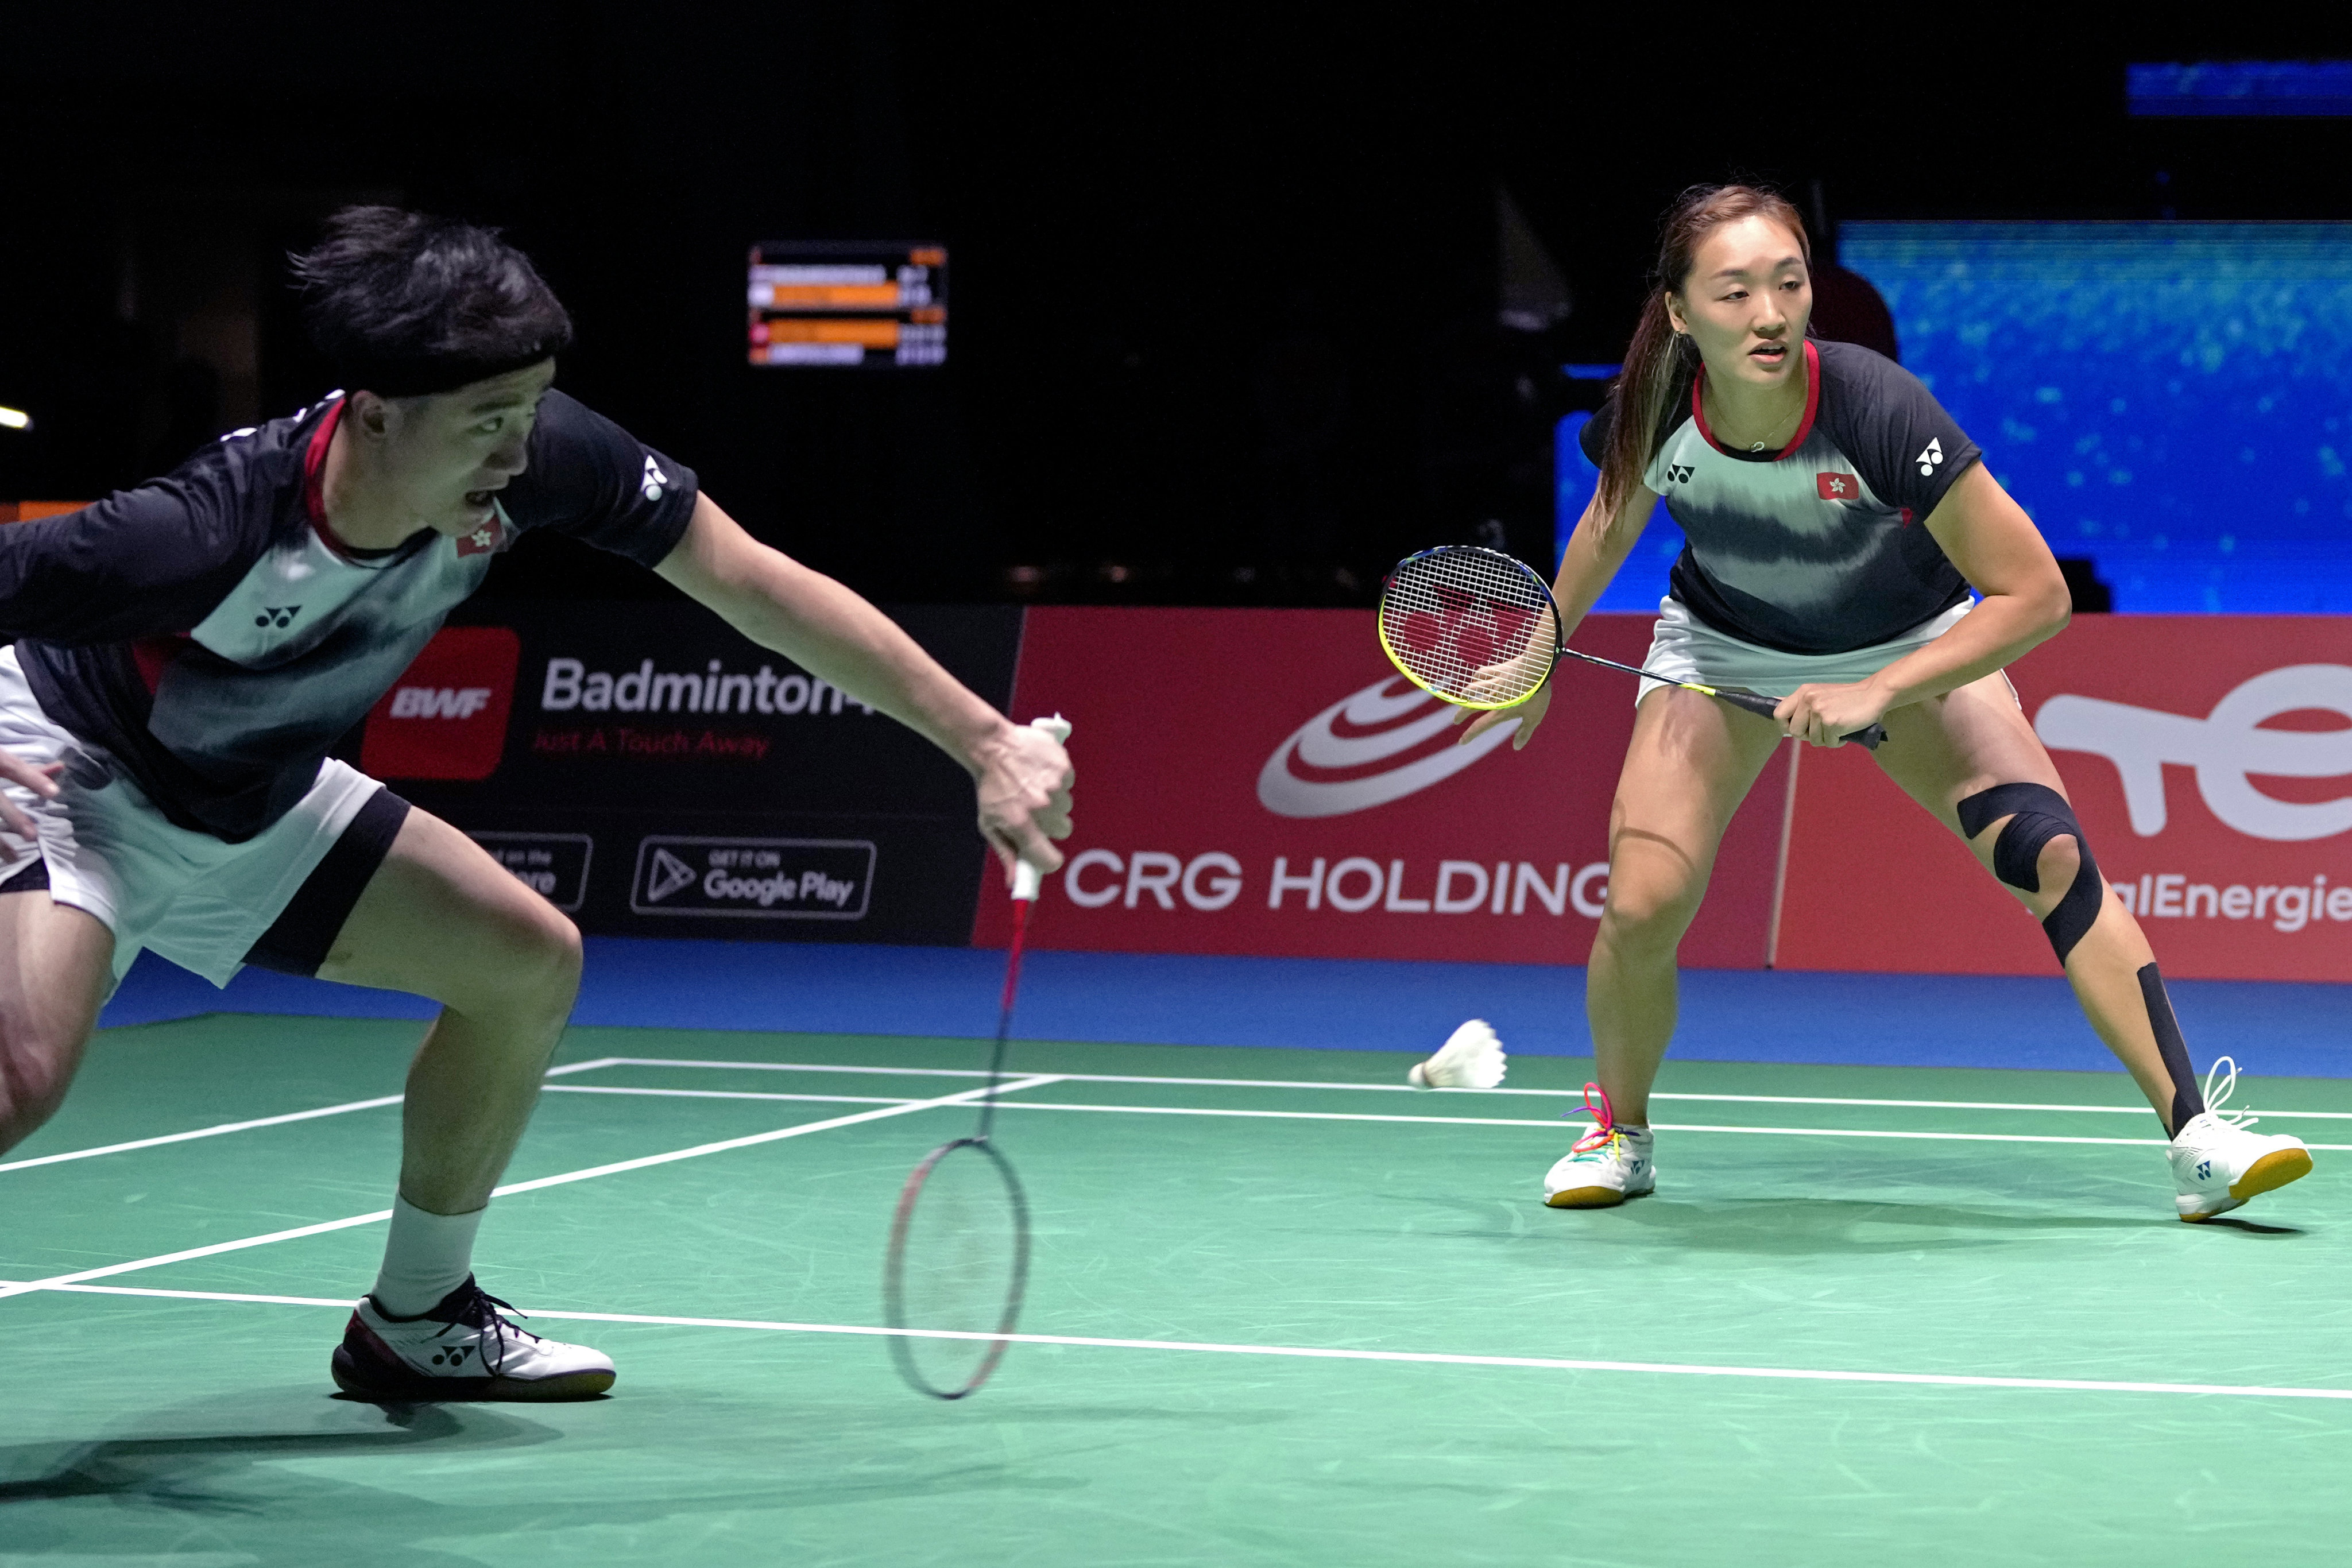 Hong Kong’s Tang Chun Man and Tse Ying Suet compete during the mixed doubles quarterfinal against Germany’s Mark Lamsfuss and Isabel Lohau at the BWF World Championships in Tokyo. Photo: AP